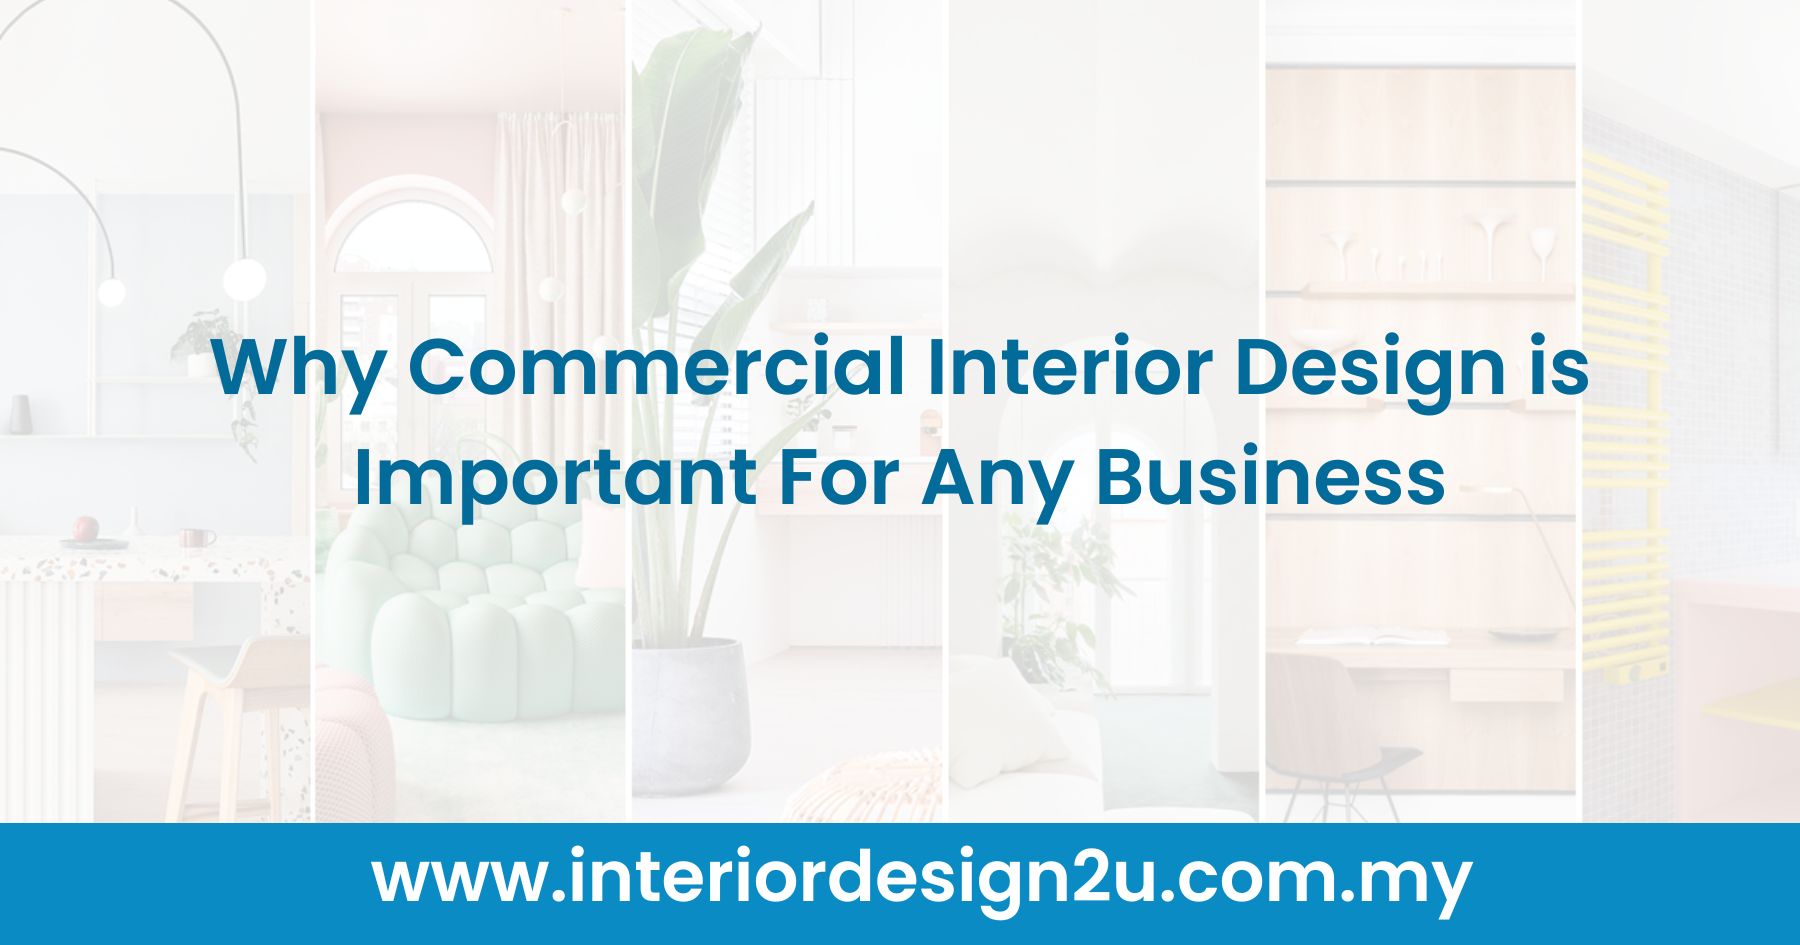 Why Commercial Interior Design is Important For Any Business